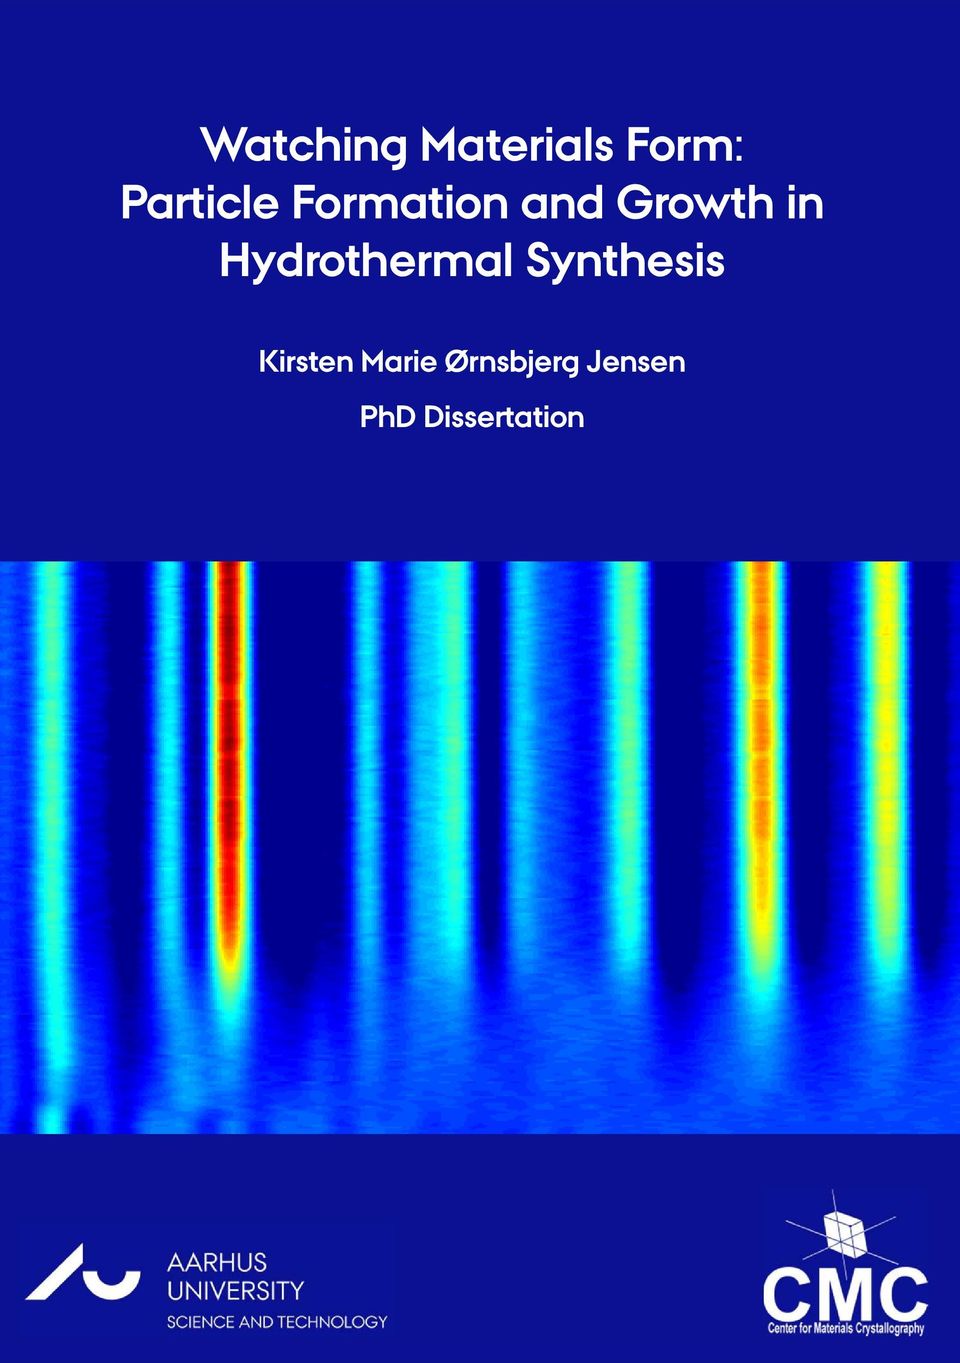 in Hydrothermal Synthesis